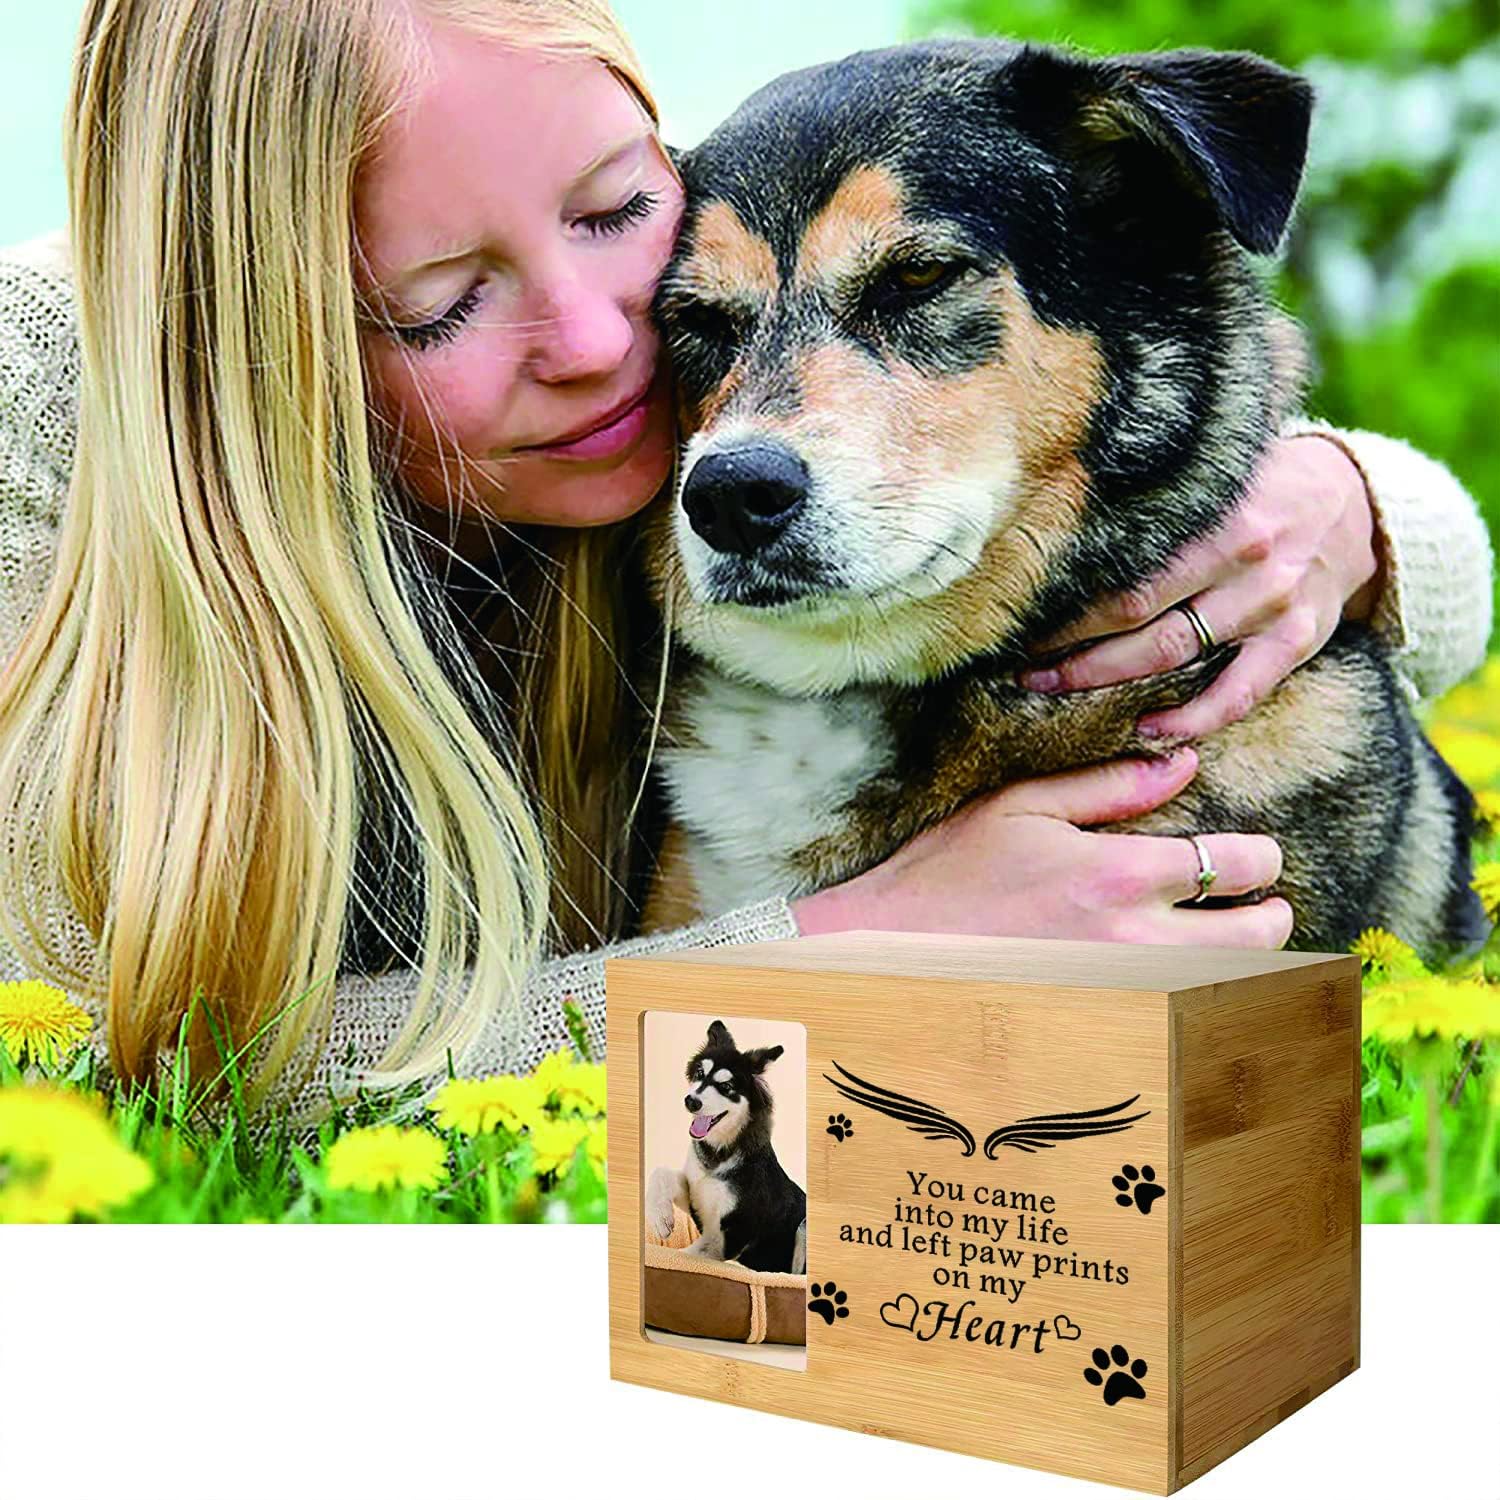 Sduby Pet Urns for Dogs or Cat Ashes, Dog Keepsake Box Cremation Urn, Pet Memorial Box, Pet Cremation Urn with Photo Frame,Large Wooden Urn for Dog Ashes, Pet Loss Memorial Gifts (170 Cubic Inches)